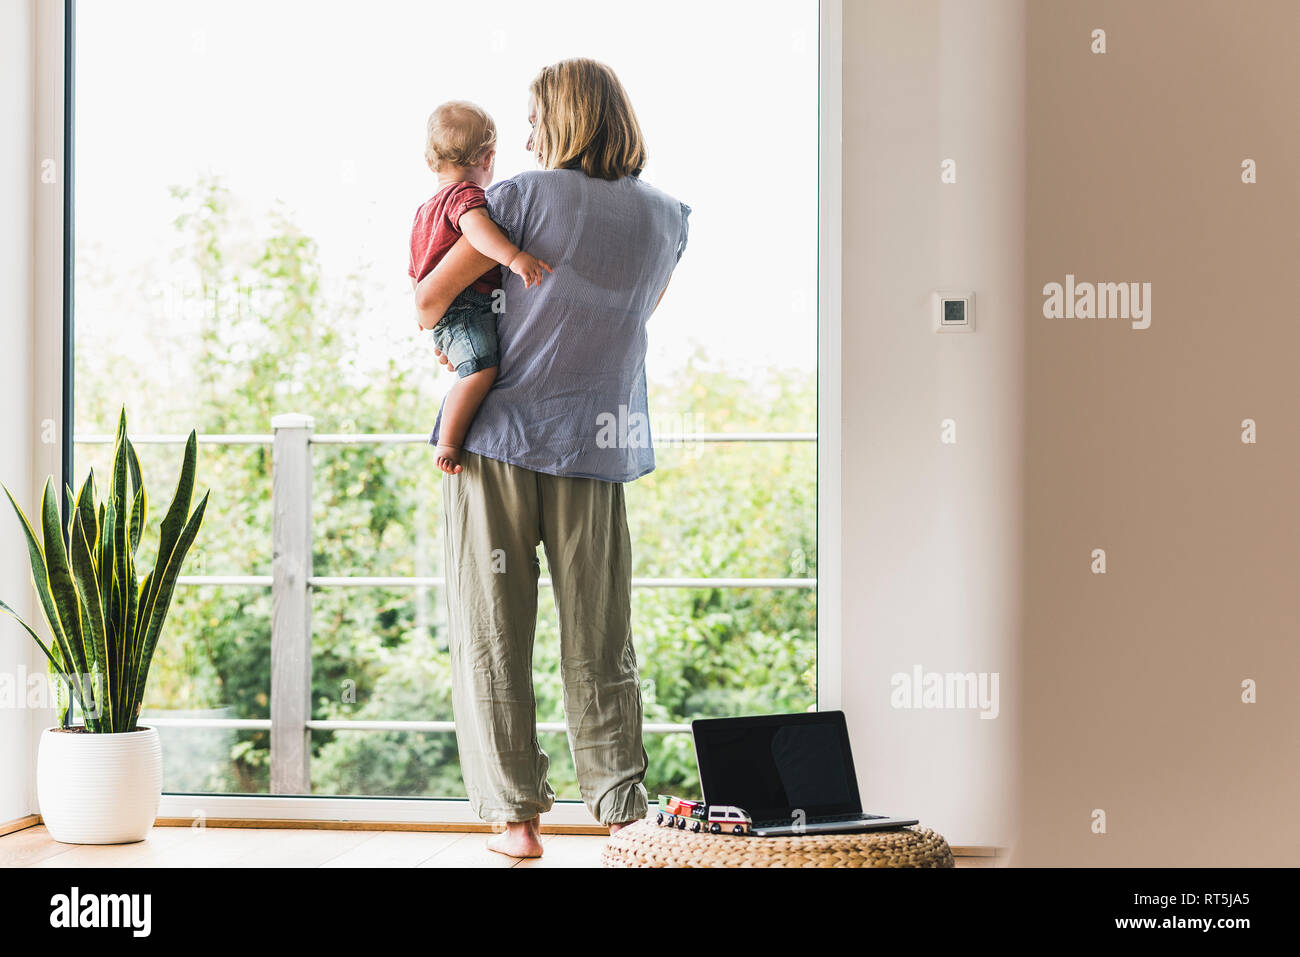 Mother carrying son, looking out of window Stock Photo